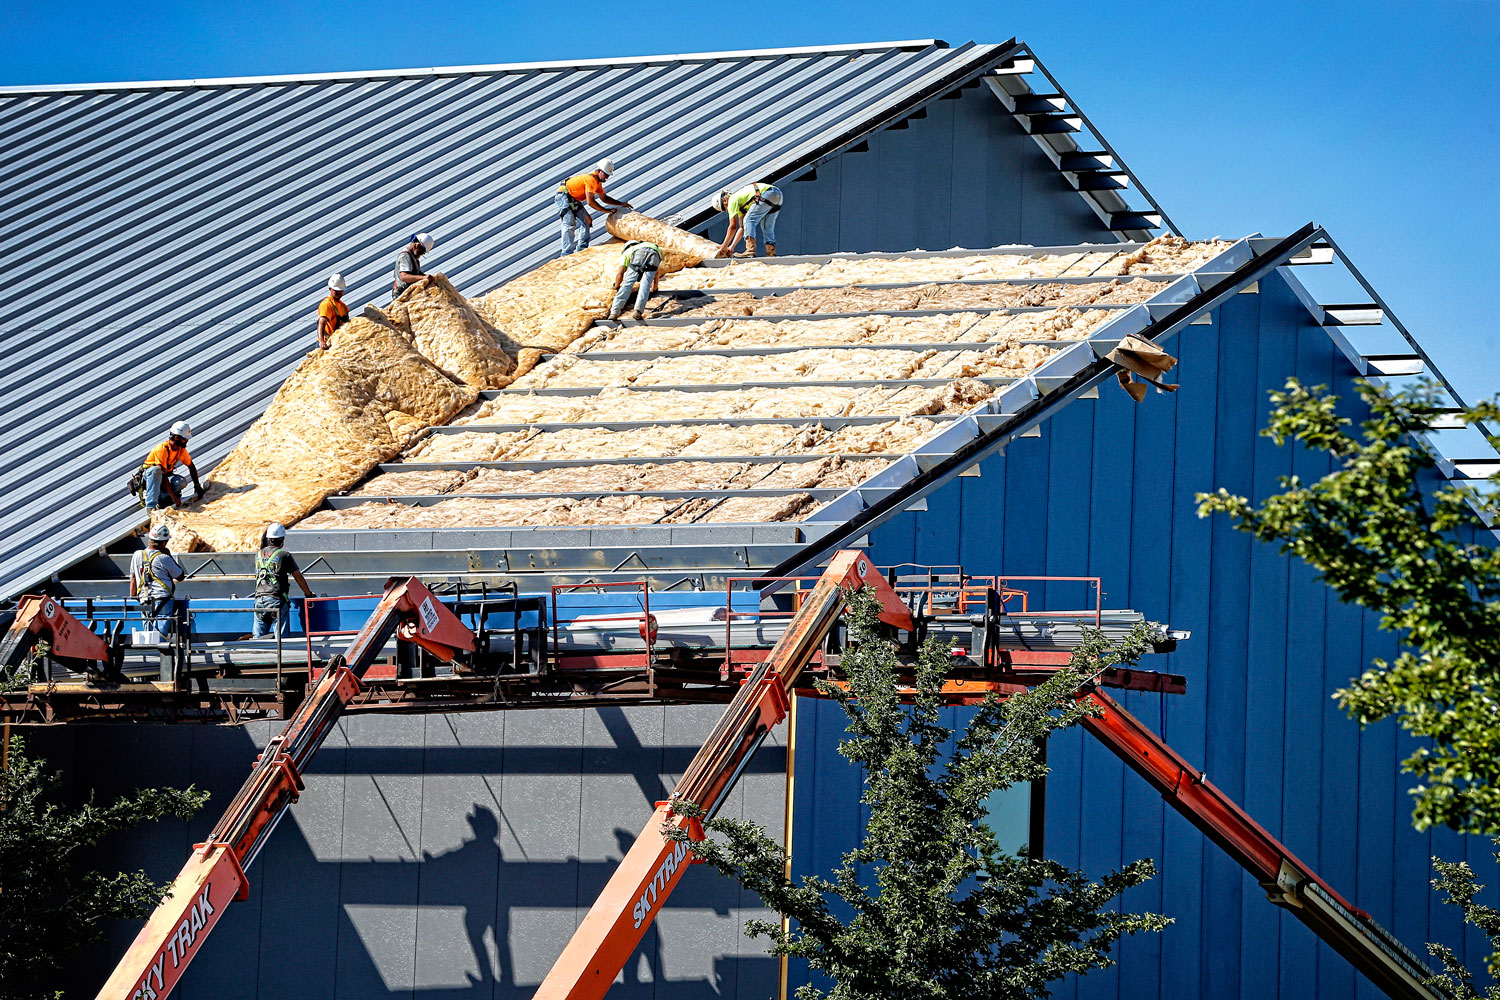 Workers install insulation in the roof at the new tennis center